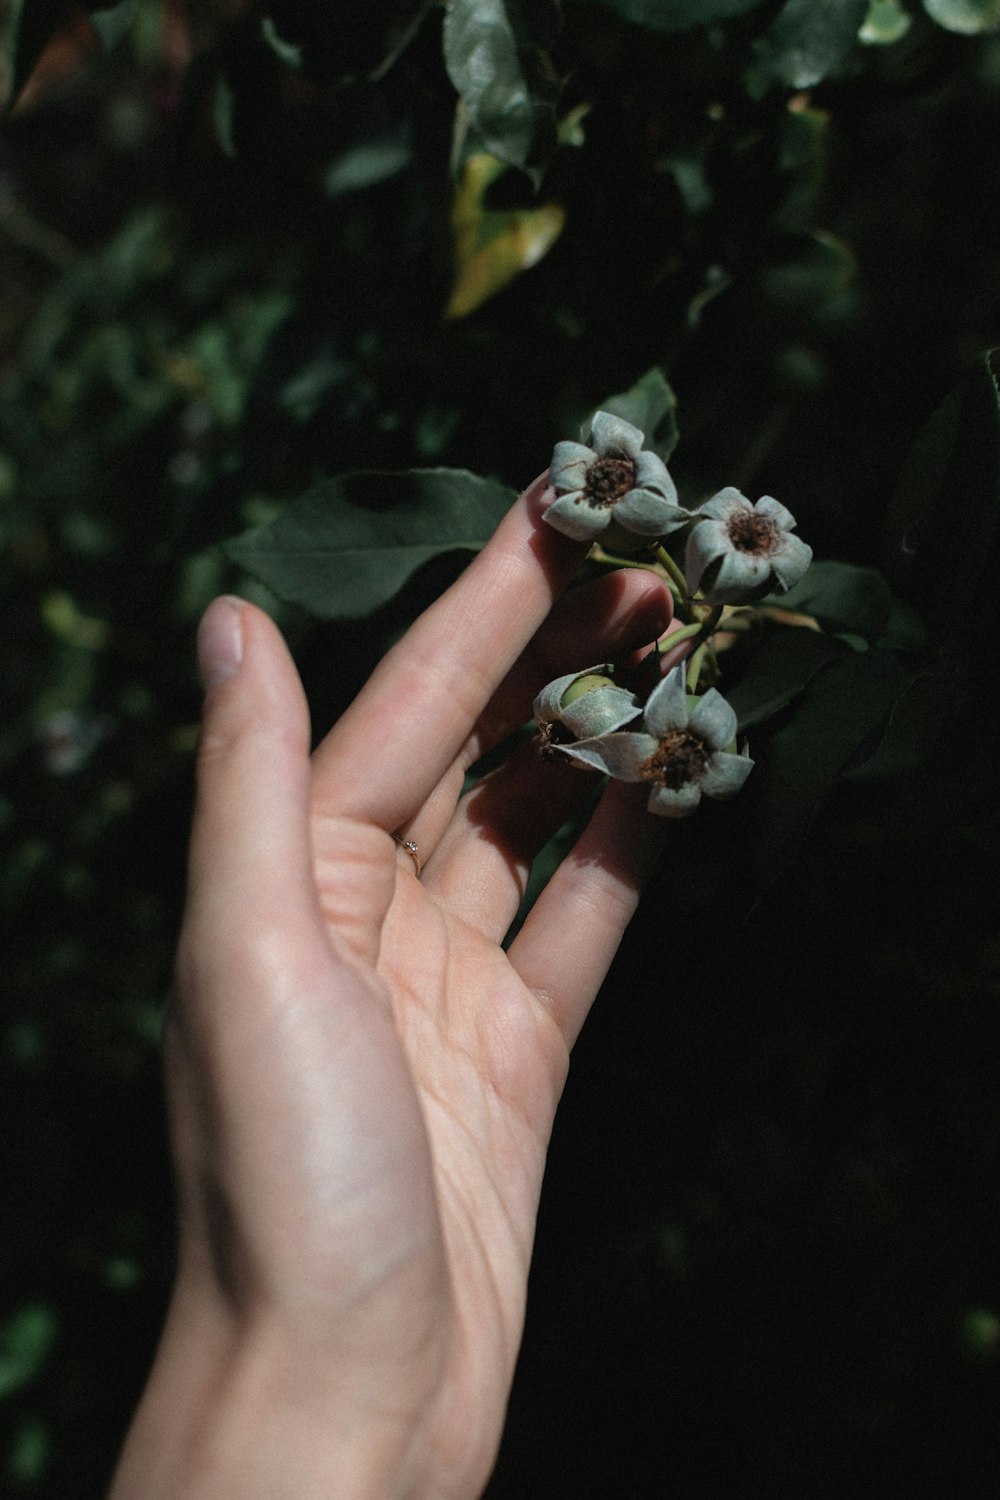 a hand holding a small plant